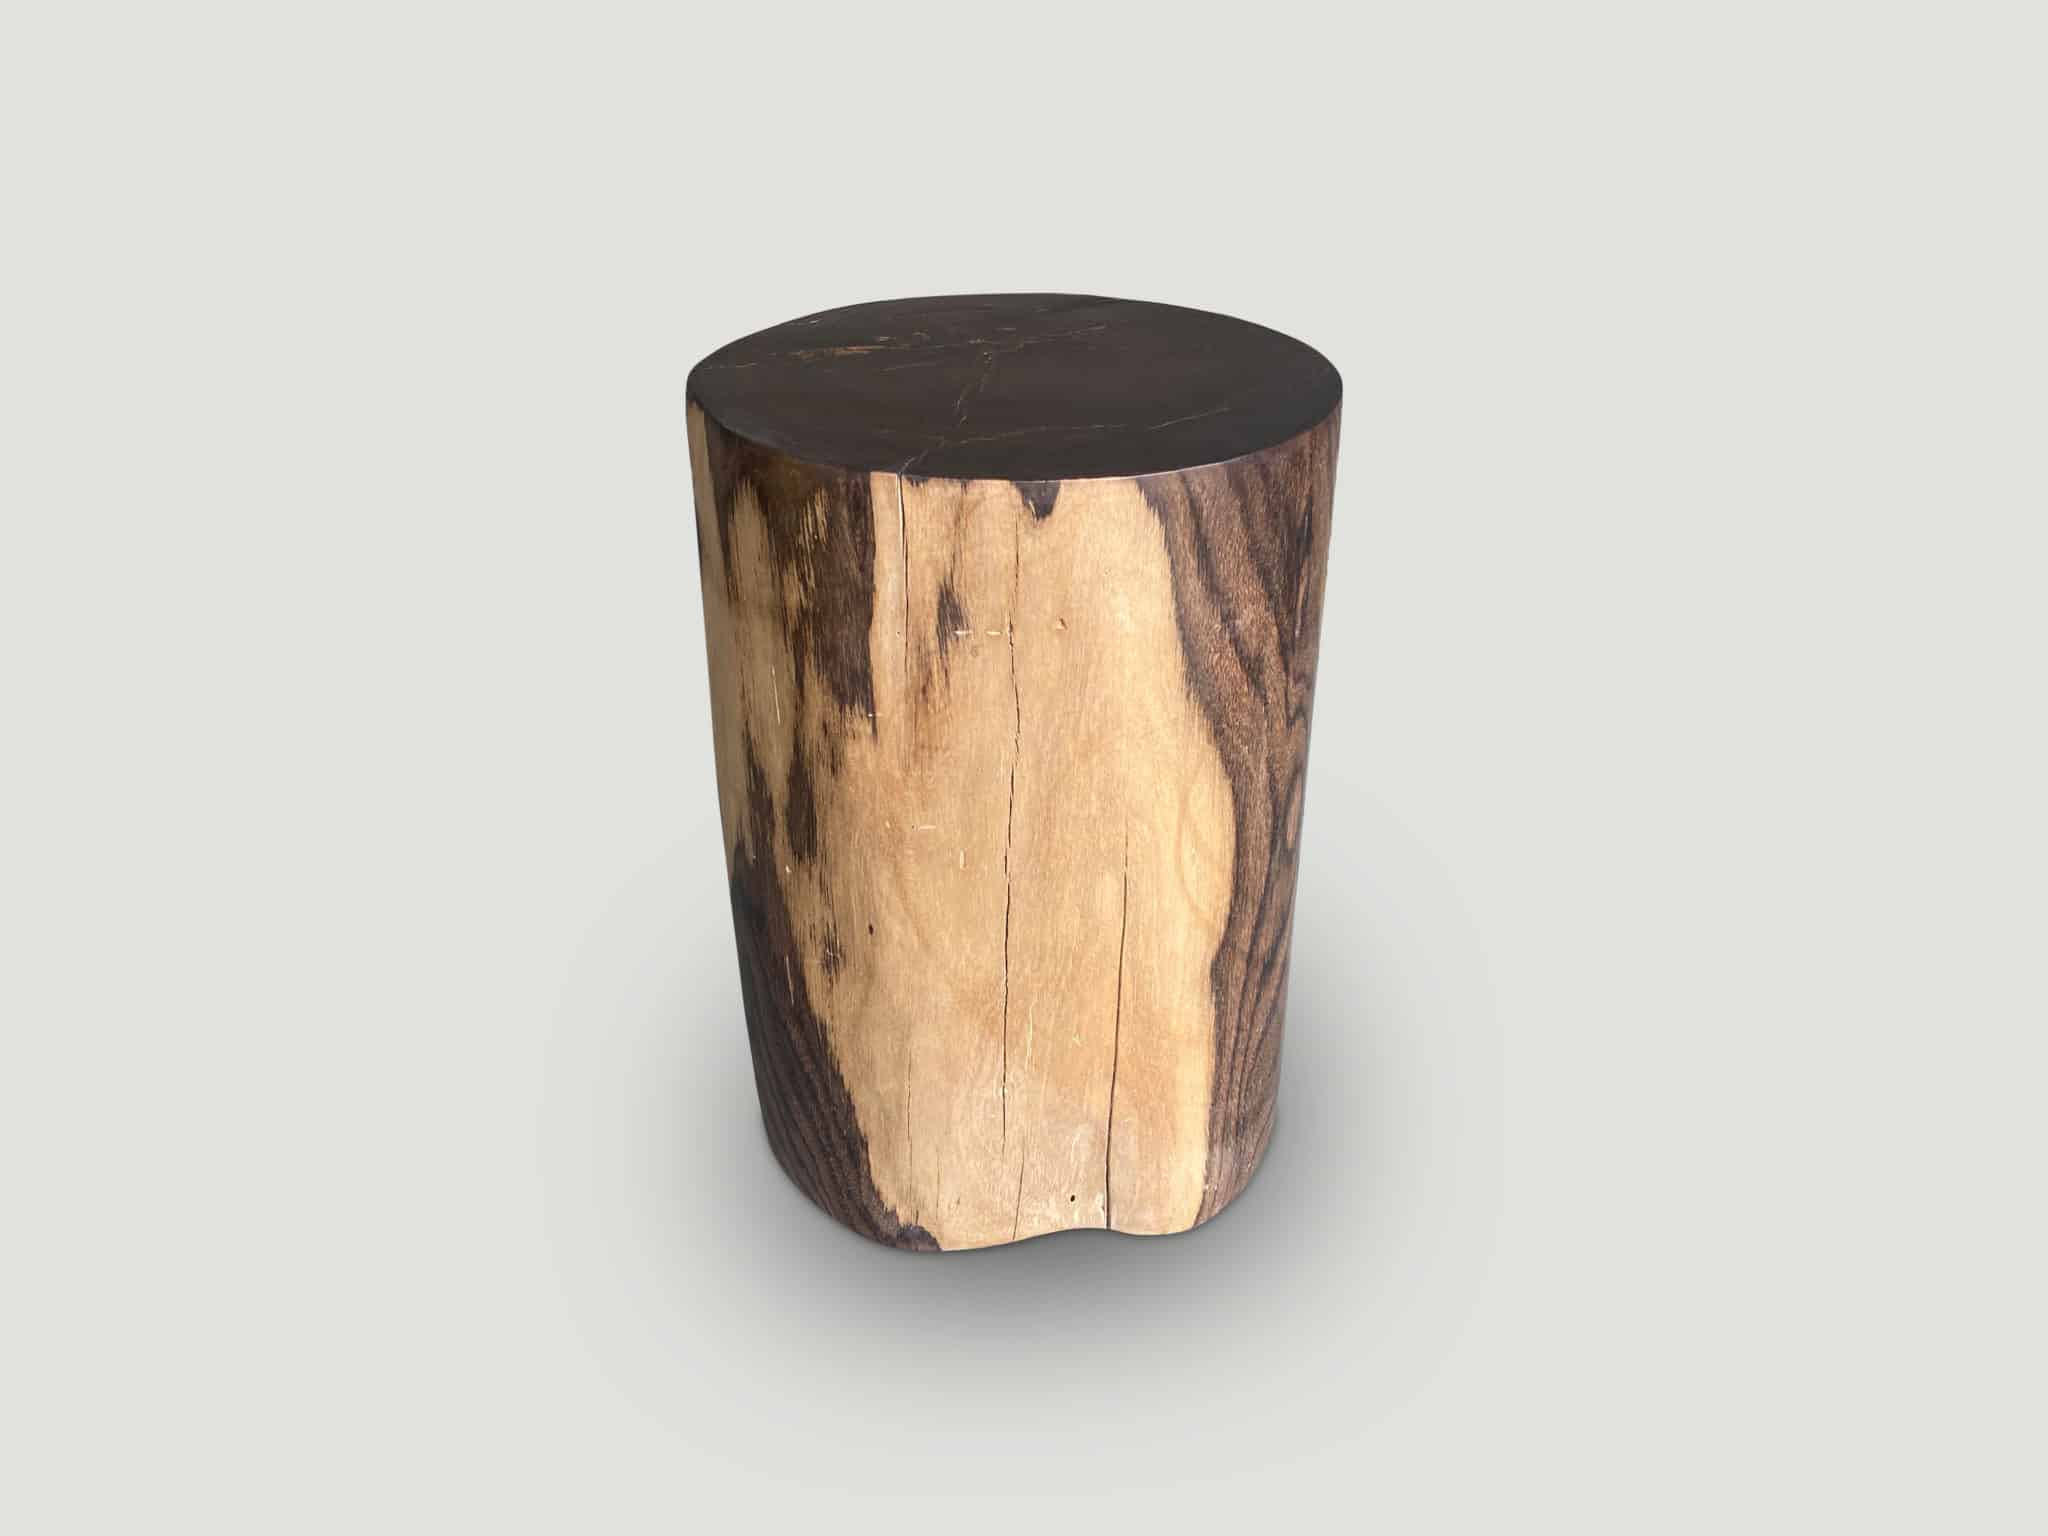 EXQUISITE ROSE WOOD SIDE TABLE